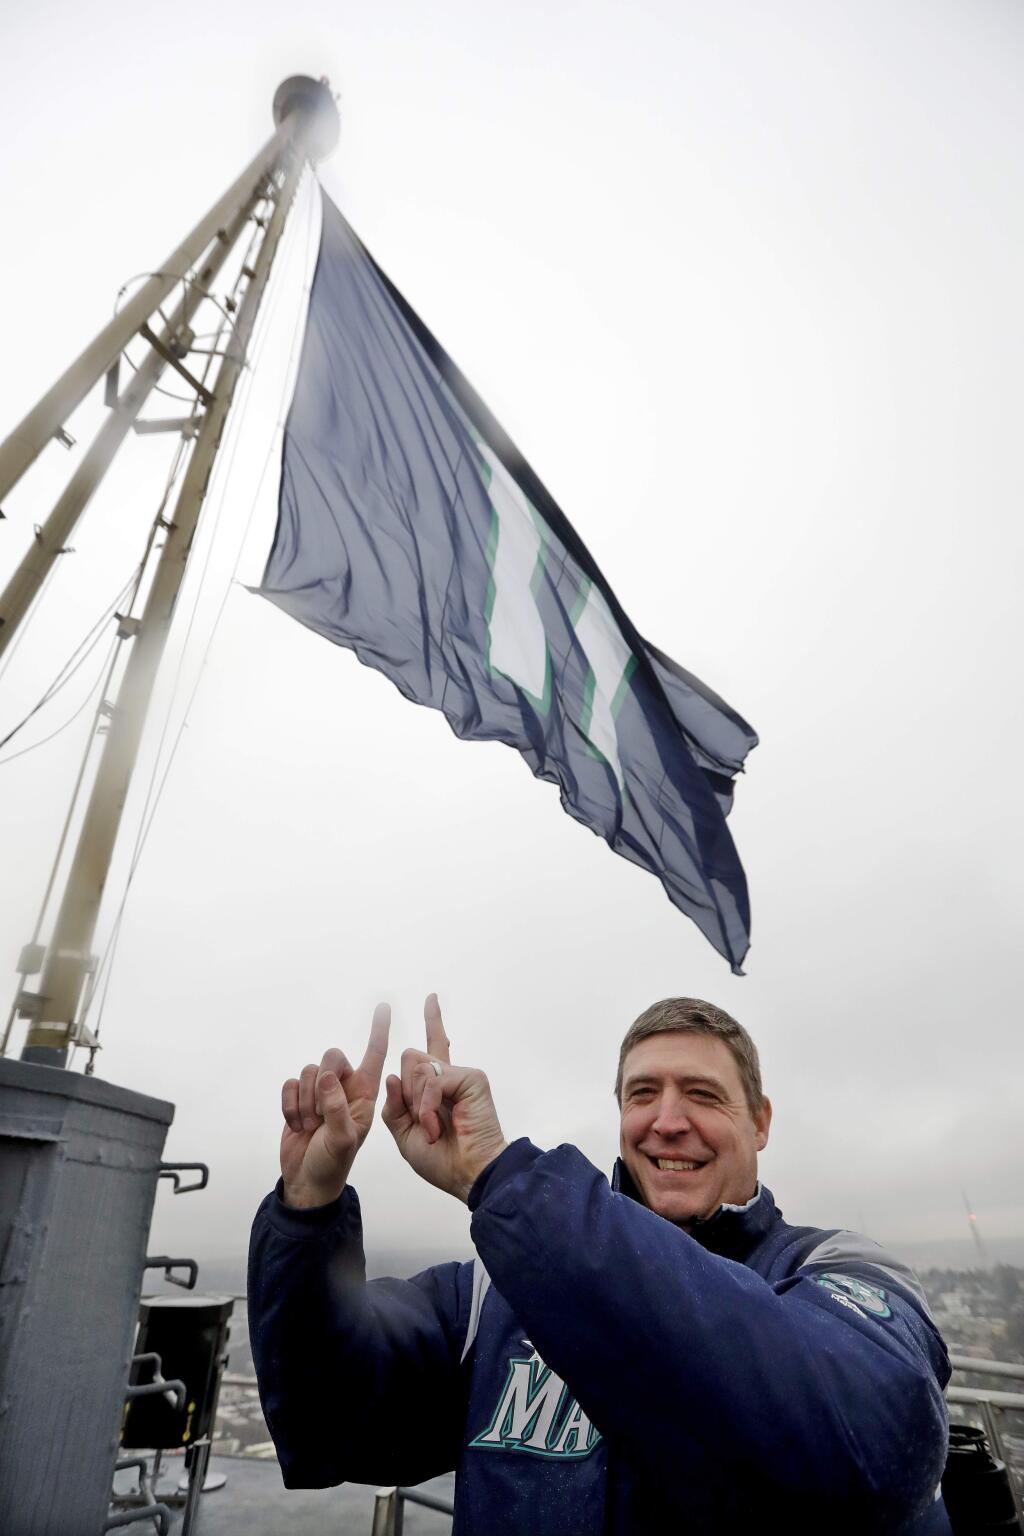 Former Seattle Mariners catcher Dan Wilson mimics the No. 11 flag behind him, honoring baseball Hall of Fame inductee Edgar Martinez with his playing number, as he poses atop the Space Needle after raising the flag Tuesday, Jan. 22, 2019, in Seattle. Martinez, the longtime Mariners' designated hitter, was elected to the Hall of Fame earlier Tuesday. (AP Photo/Elaine Thompson)